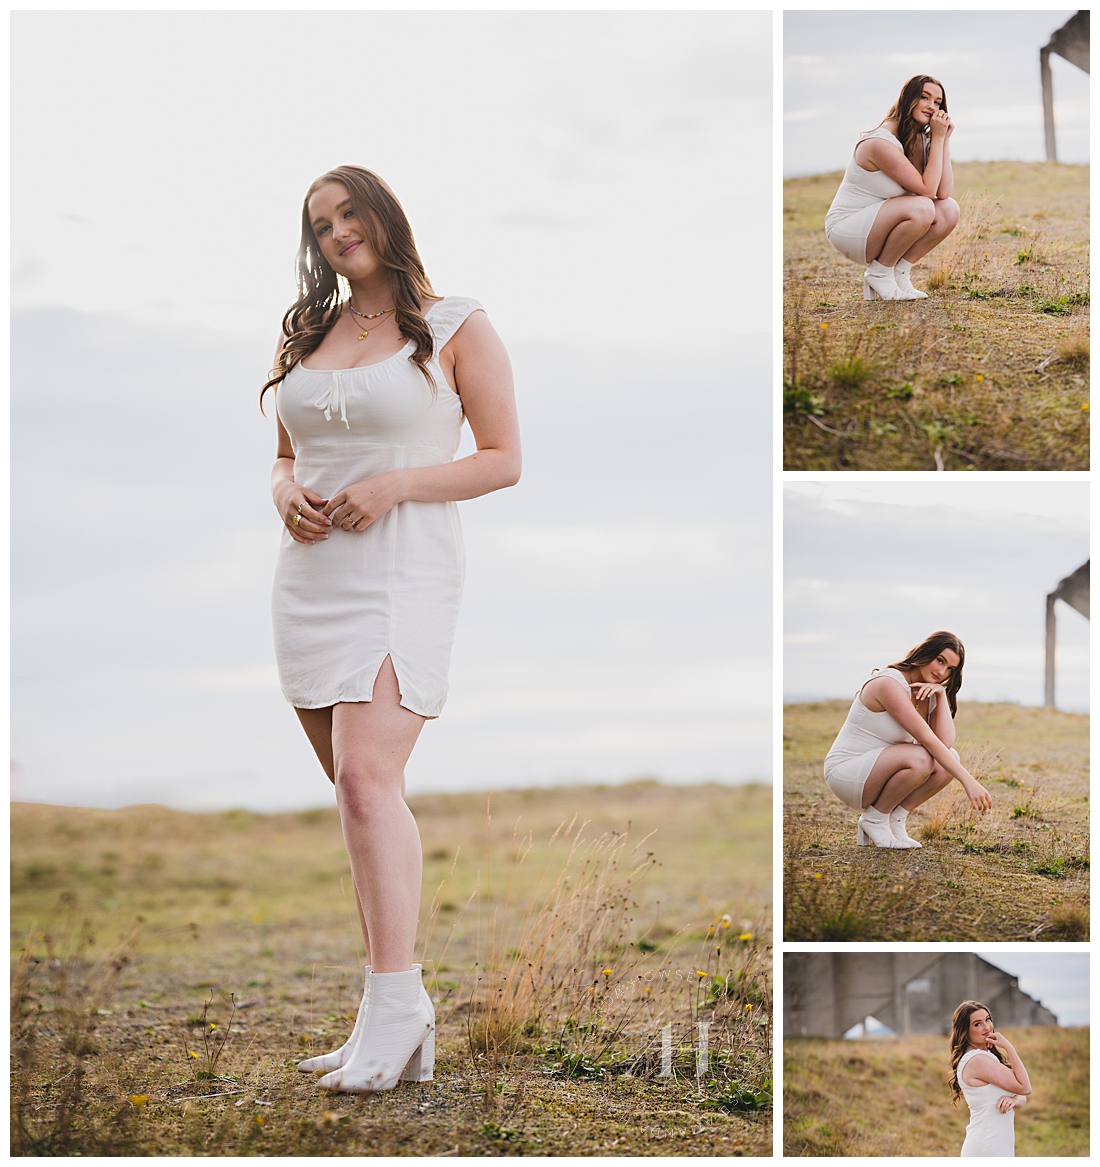 Senior Pictures at Chambers Bay | NYU Theatre Grad, Rustic Chic Portraits | Photographed by the Best Tacoma, Washington Senior Photographer Amanda Howse Photography